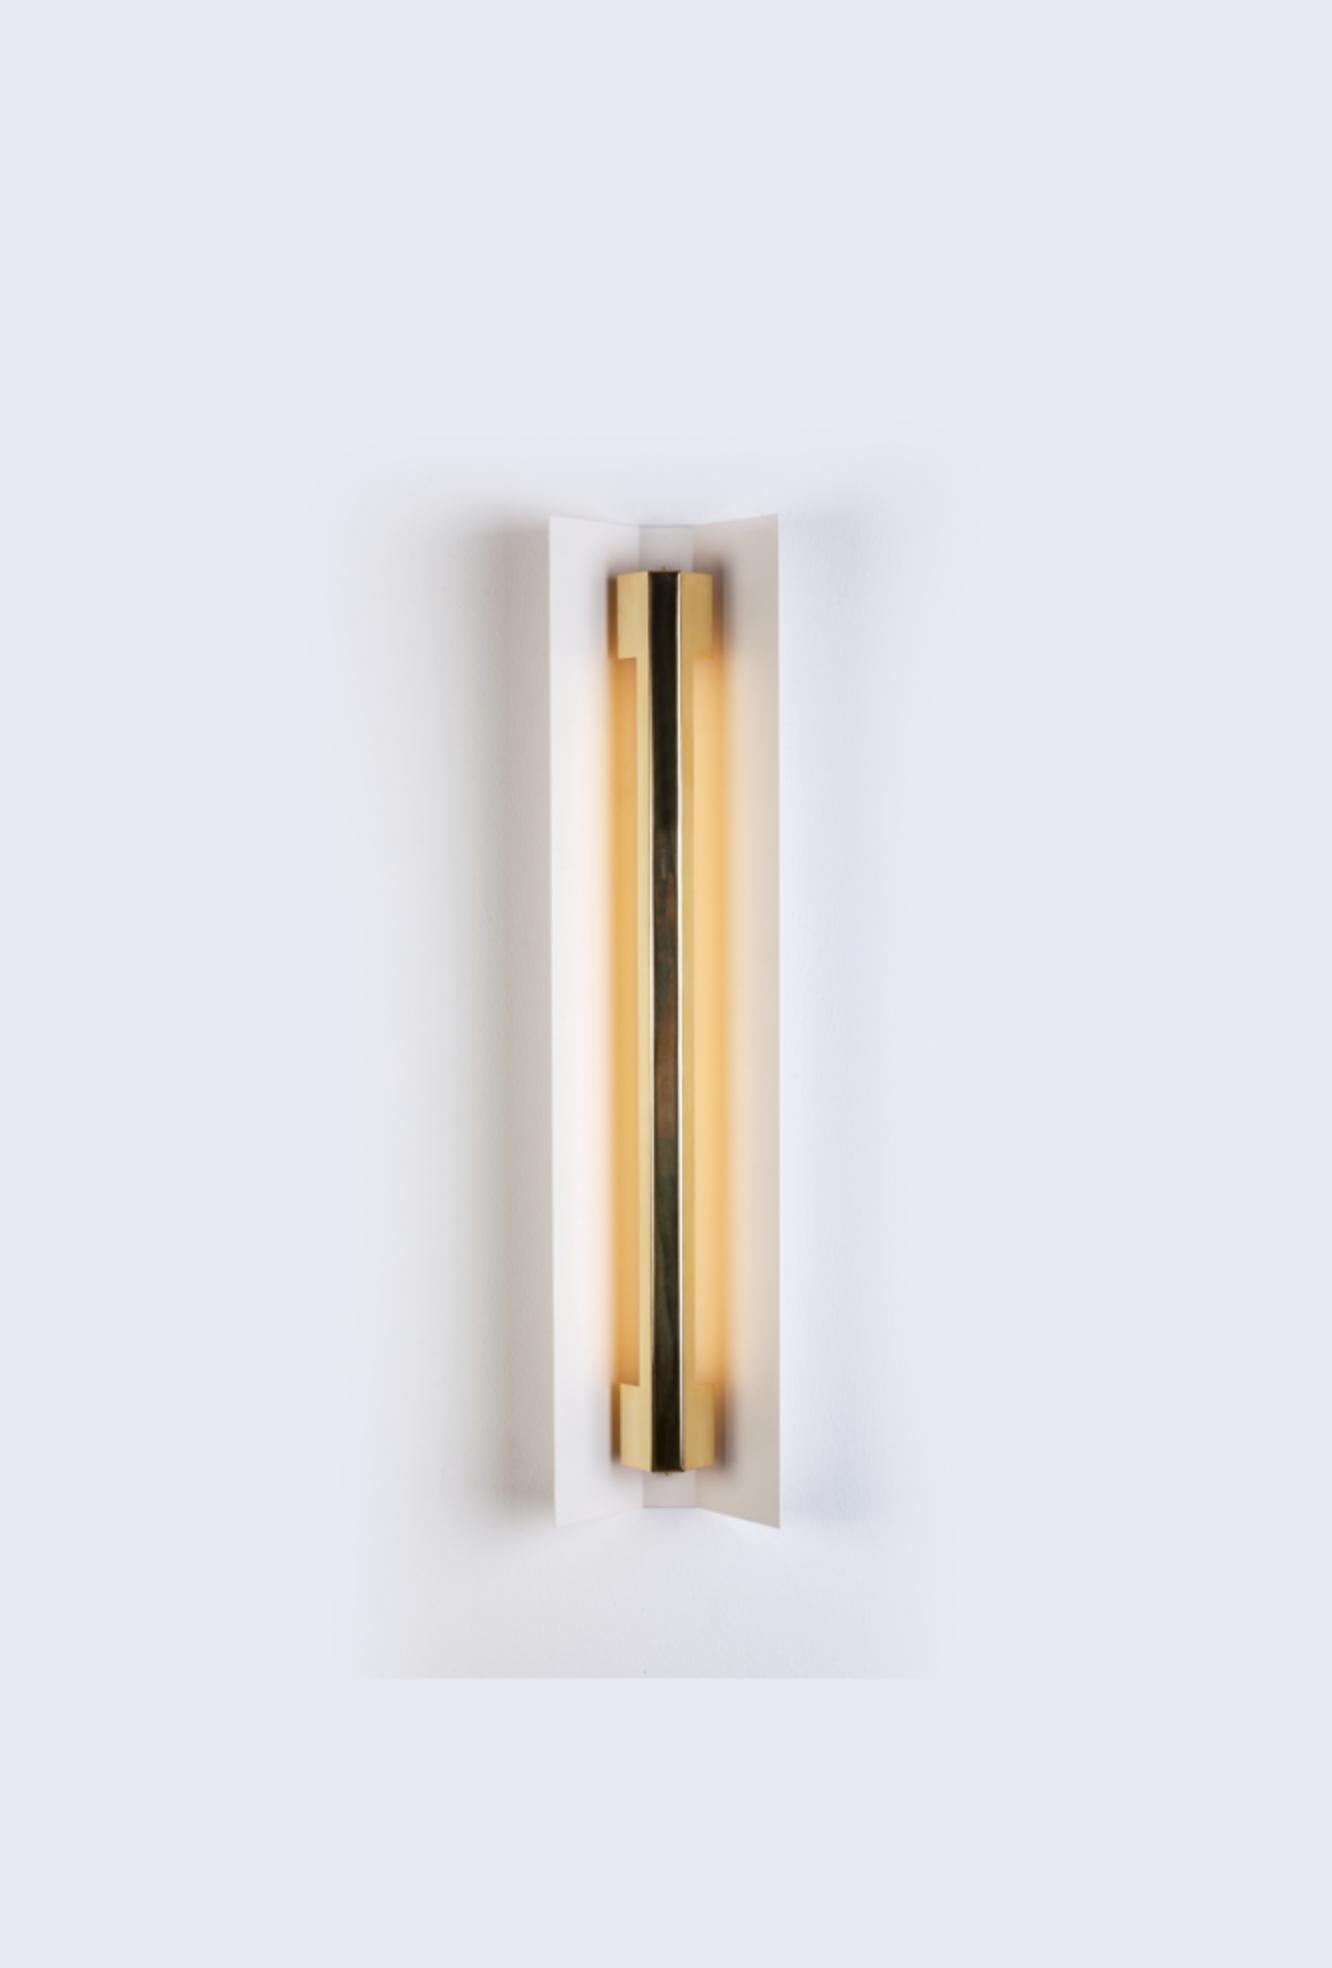 Small Misalliance ex pure white wall light by Lexavala.
Dimensions: D 16 x W 70 x H 8 cm.
Materials: powder coated shade with details made of brass or stainless steel.

There are two lenghts of socket covers, extending over the LED. Two short